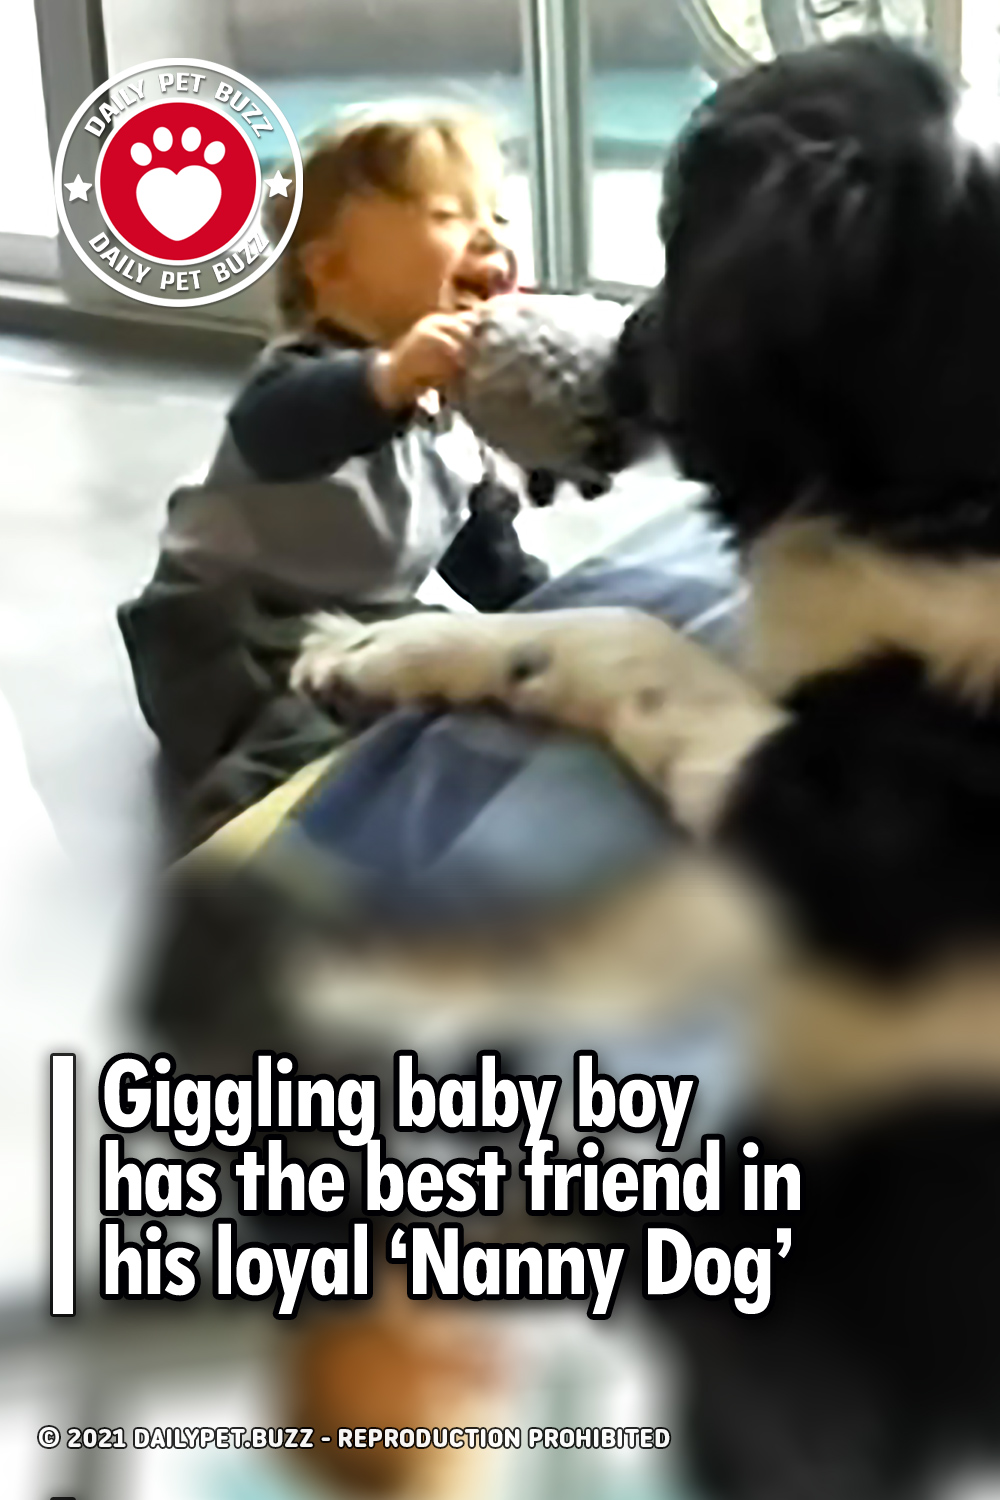 Giggling baby boy has the best friend in his loyal ‘Nanny Dog’